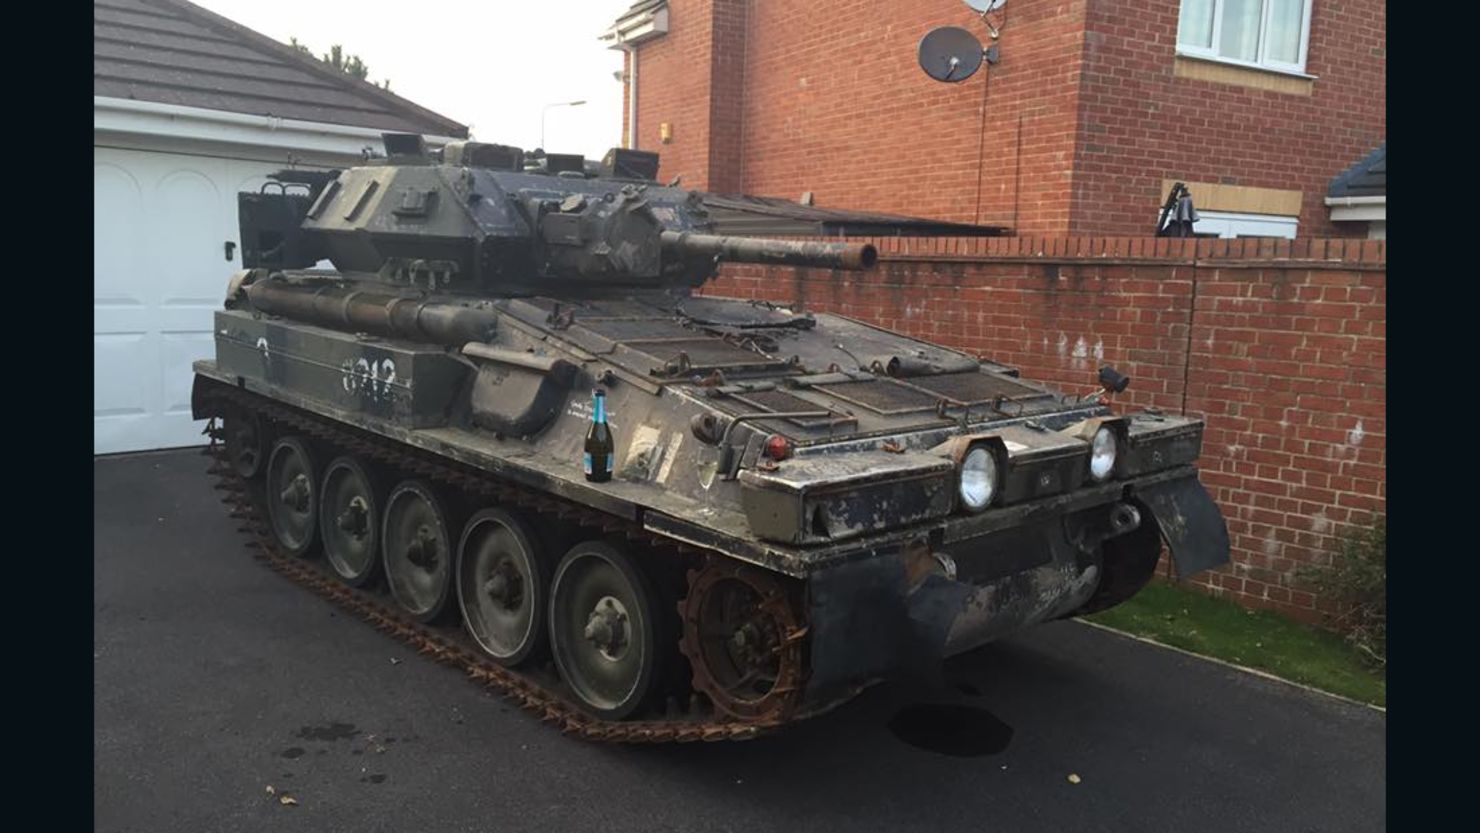 Jeff Woolmer's ex-army tank safely parked in his new driveway